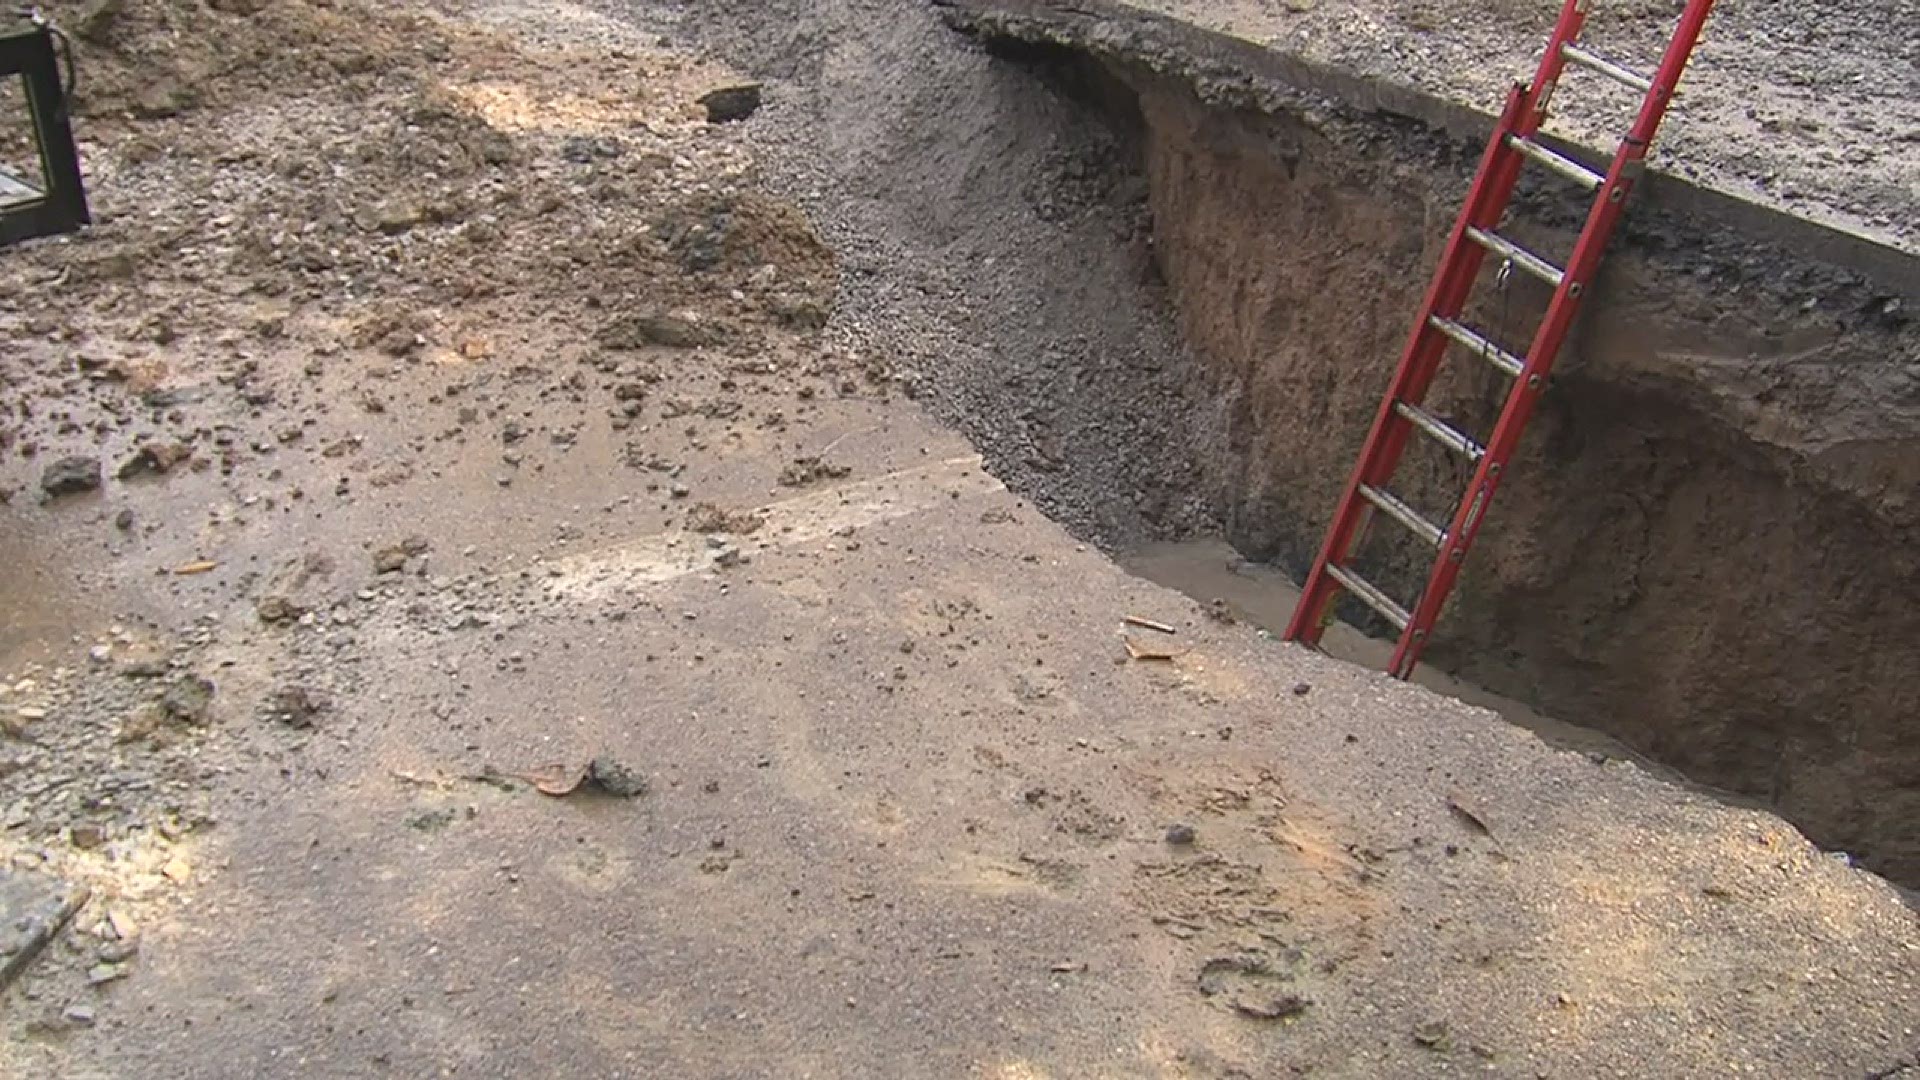 The City of Memphis says the sinkhole opened while crews were doing excavation work.